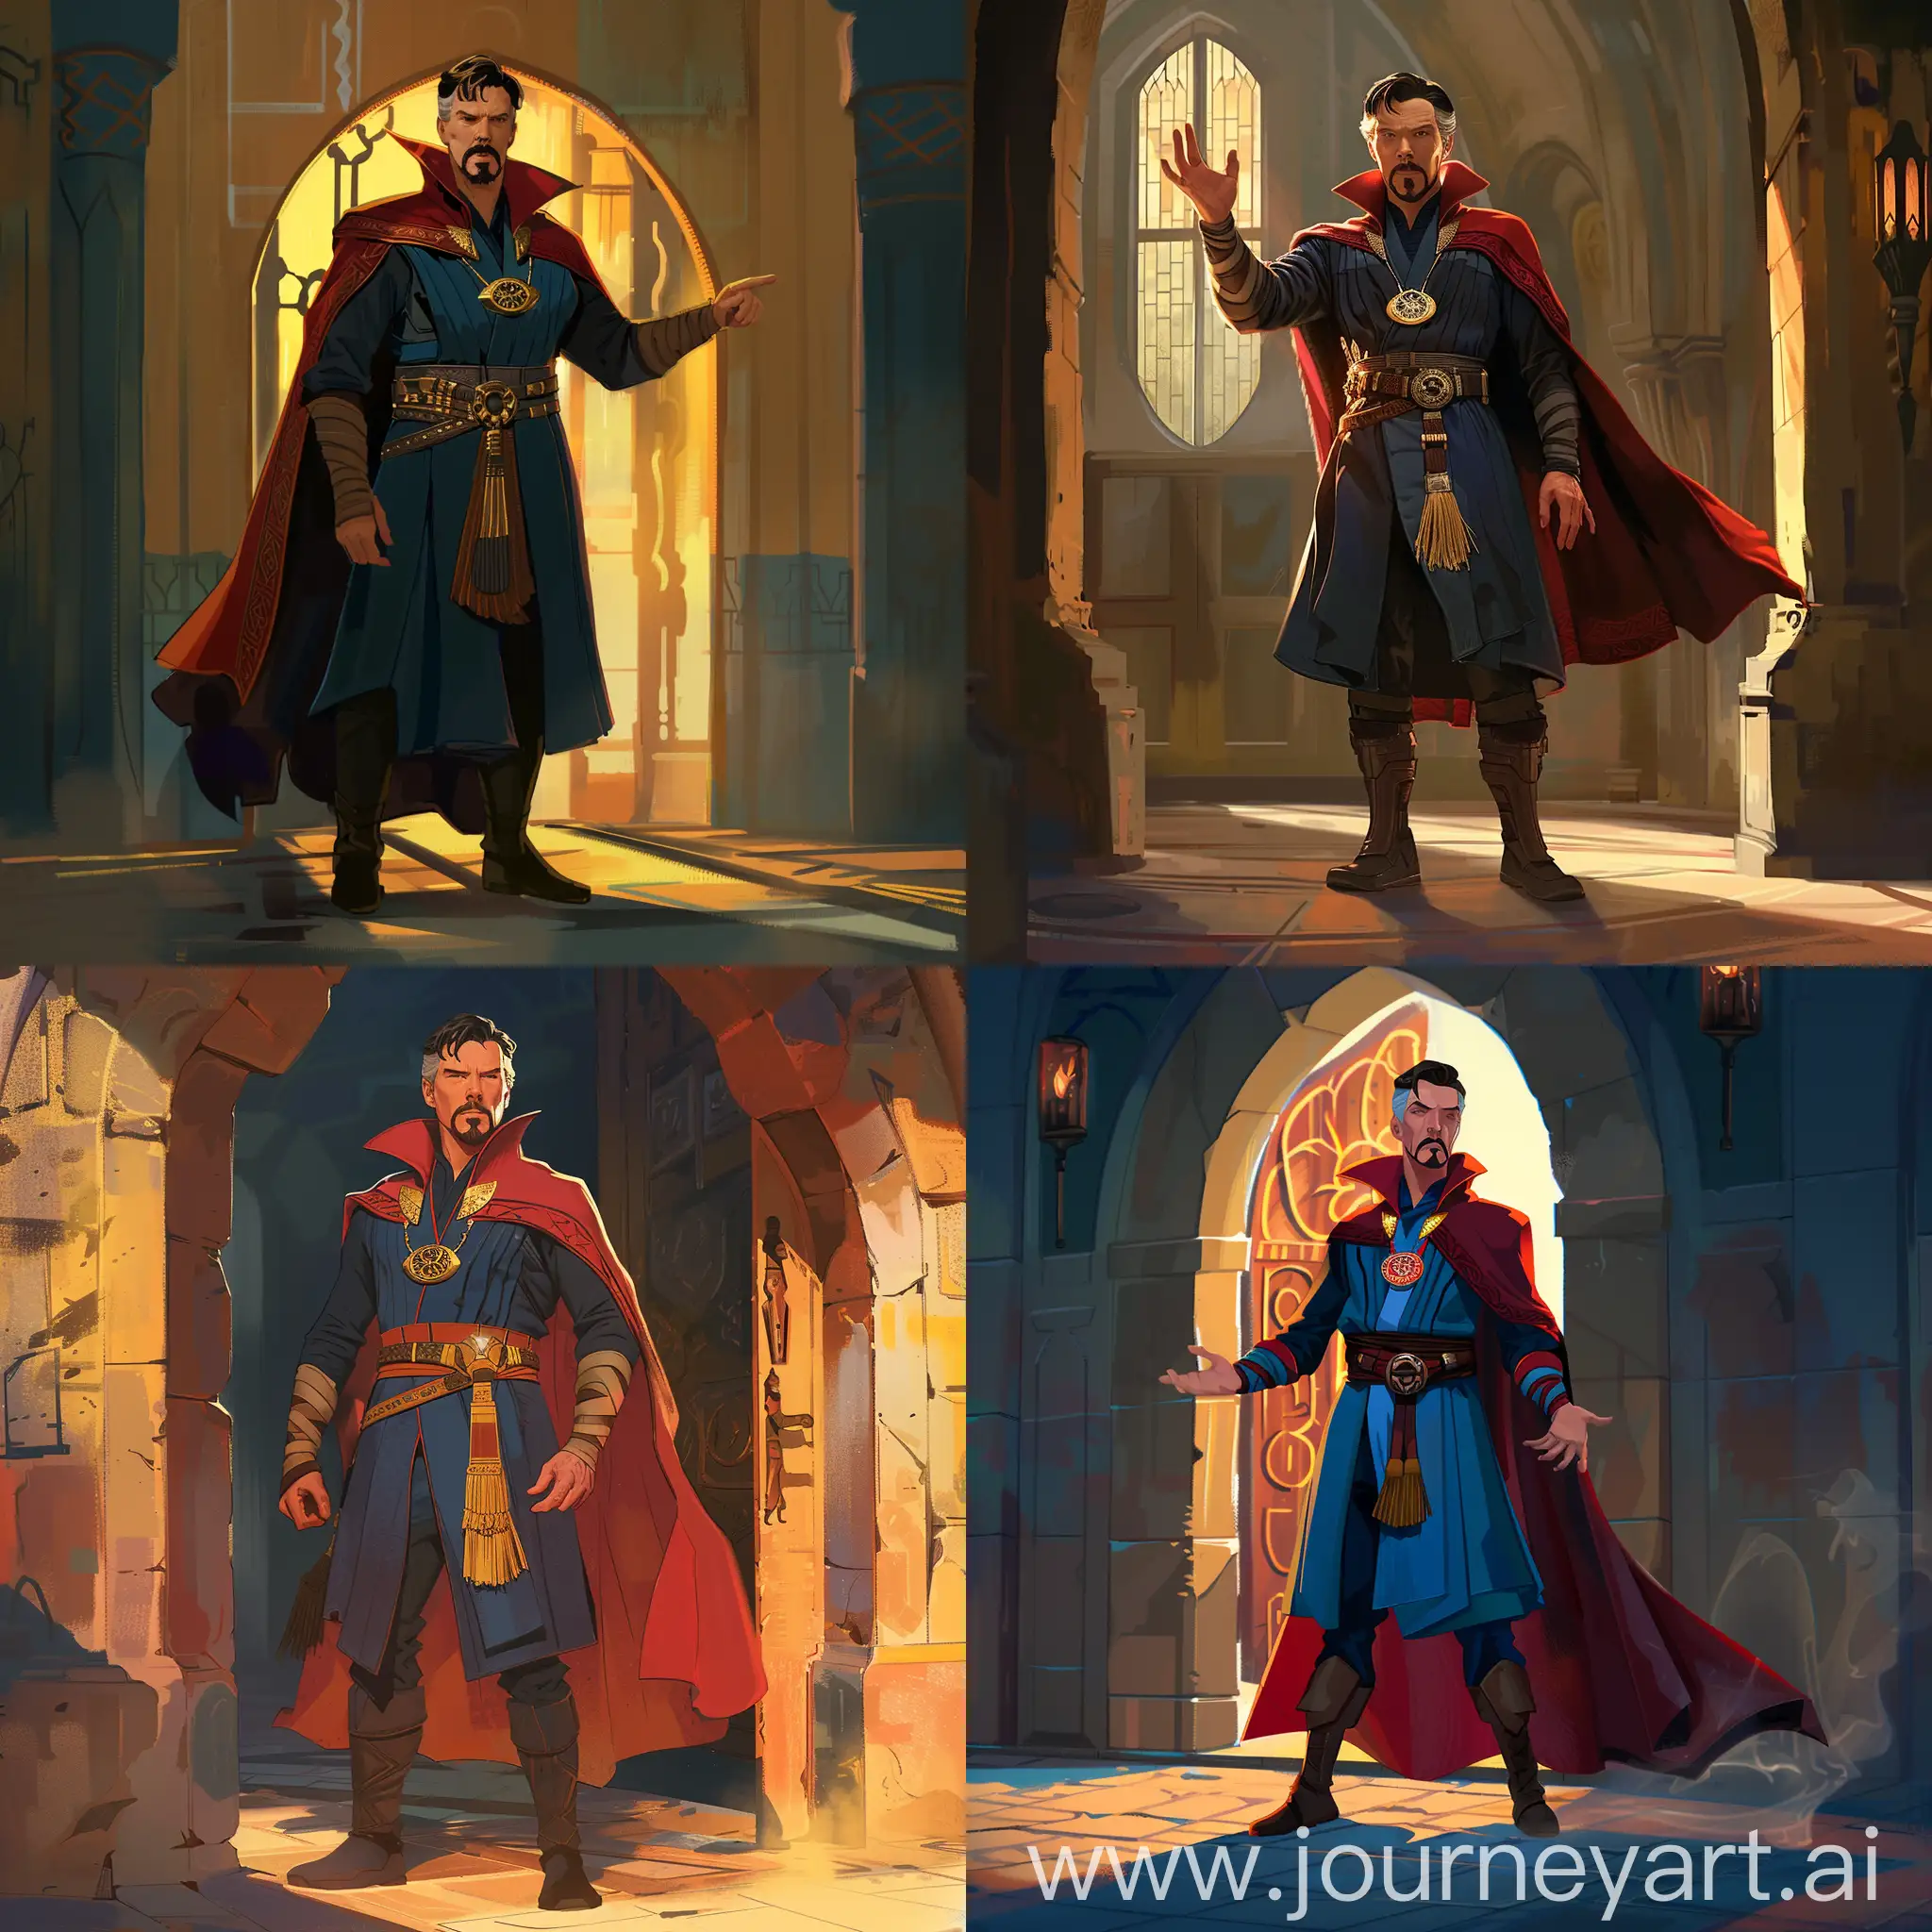 Subject: Doctor Strange's character.
Pattern of design and illustration: following the animation of Marvel Studios, in the name of what if..
Character Description: Stands upright, facing the first-person audience, and invites him in politely but mysteriously by pointing to a door.
Subject: Doctor Strange's character.
Pattern of design and illustration: two-dimensional and follow animation illustration: what if.., from Marvel Studio.
Character description: He wears his special clothes, but without a cape, the details of the clothes are relatively few, the details of the face are relatively expressive, he stands tall, and he stands facing the viewer in the first person, he looks at him politely with a mysterious smile and gestures and gestures. Both hands respectfully invite him to a door in the middle of the right wall, politely but mysteriously.Description of the image: one-point perspective, a square cubic hall, from the first view, the adjacent walls are very narrow, the hall is similar to an Achaemenid place of worship but with little detail, the lighting space is from small torches on the walls, but the supplier Little light is produced and the atmosphere is dim and mysterious. The character of Dr. Strange is placed in the vertical one-third division from the right side in relation to the space creation and the image frame.